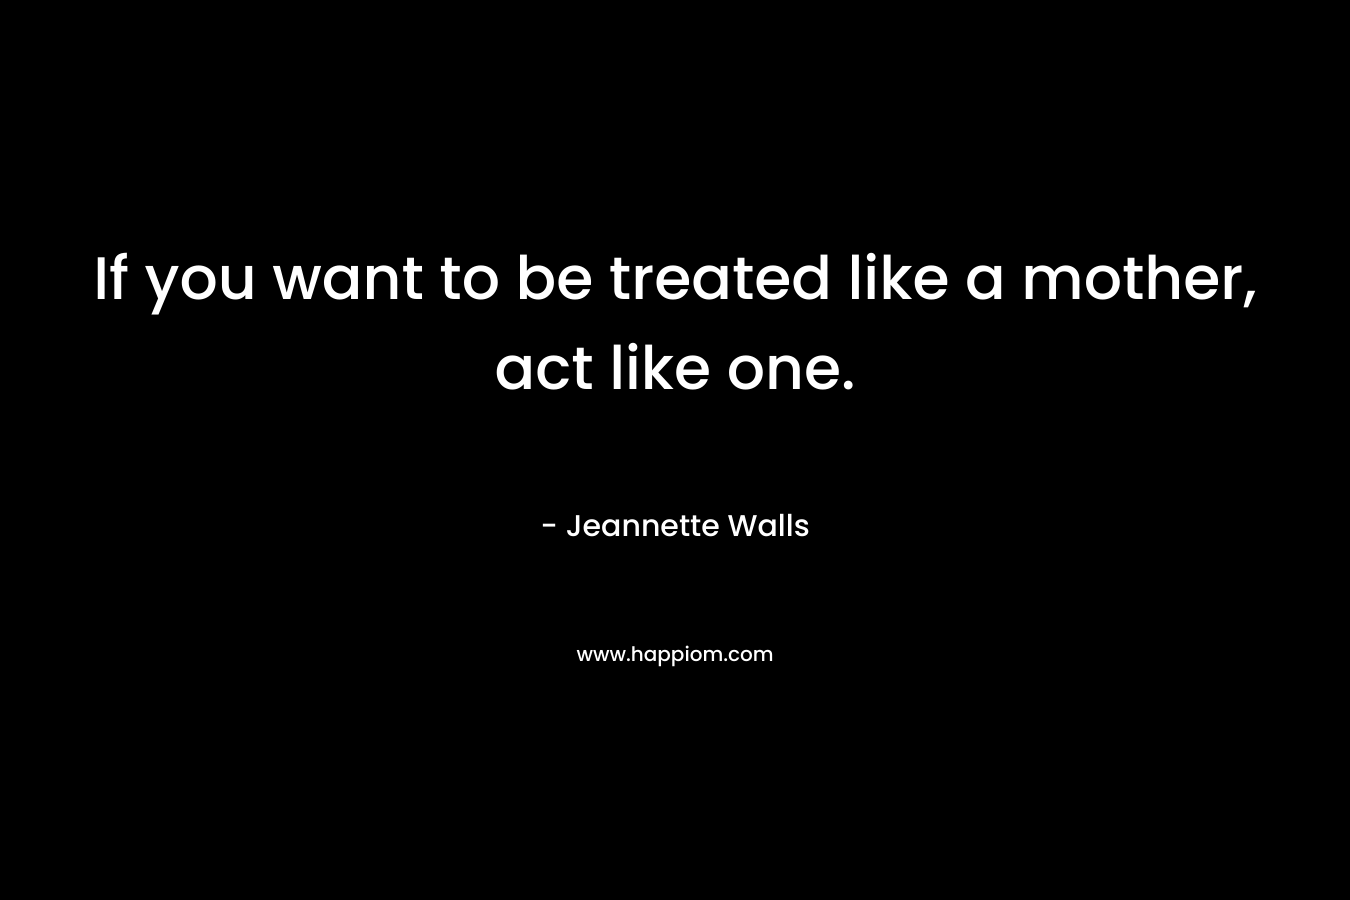 If you want to be treated like a mother, act like one. – Jeannette Walls